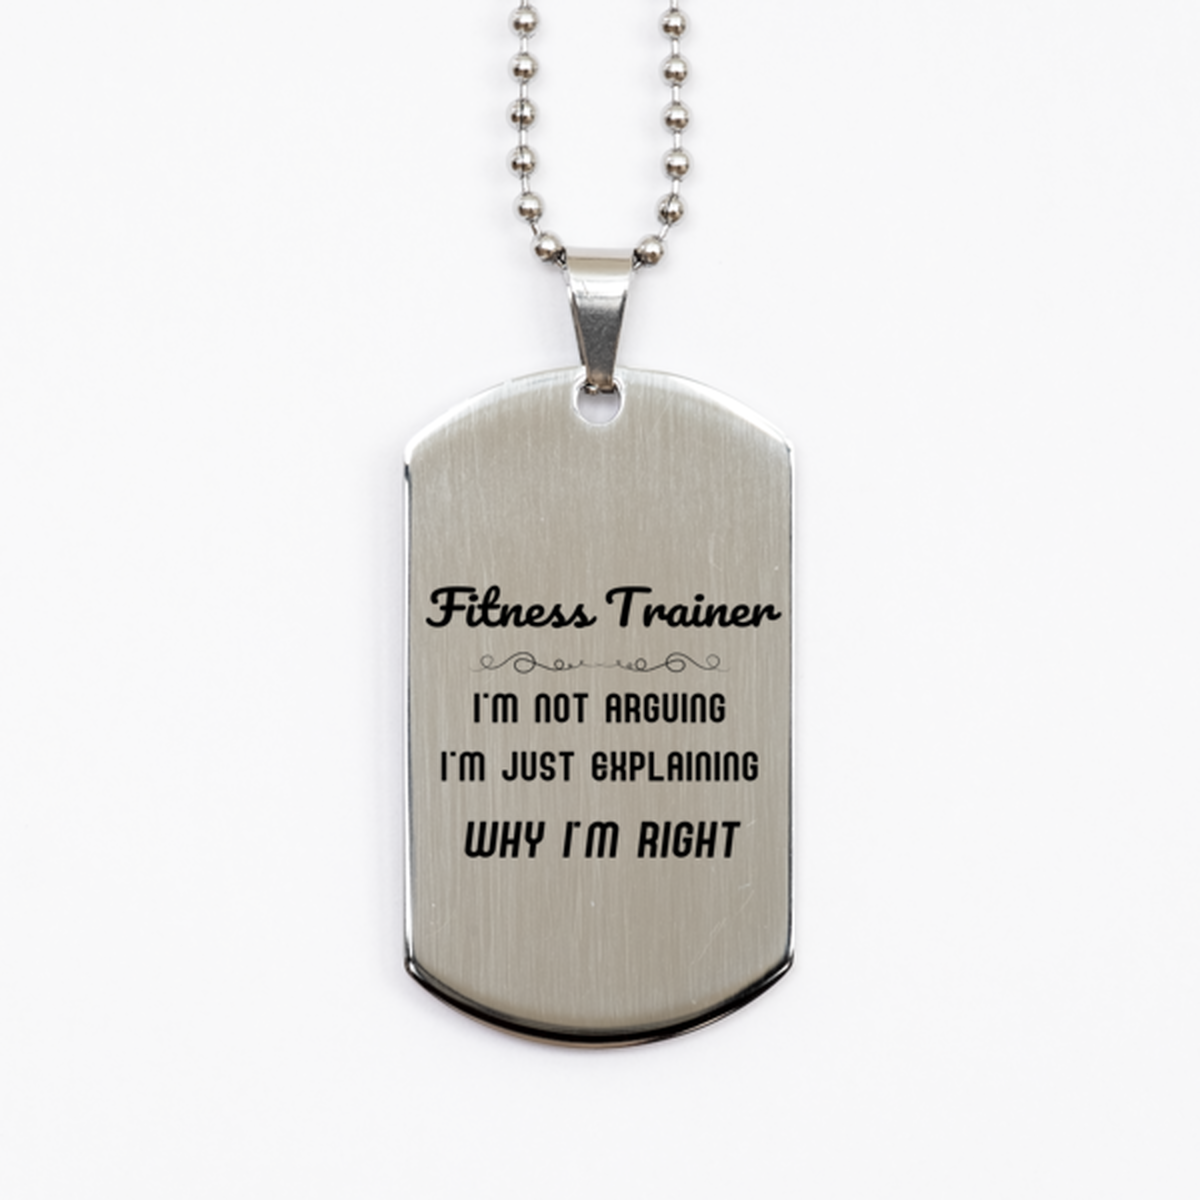 Fitness Trainer I'm not Arguing. I'm Just Explaining Why I'm RIGHT Silver Dog Tag, Funny Saying Quote Fitness Trainer Gifts For Fitness Trainer Graduation Birthday Christmas Gifts for Men Women Coworker